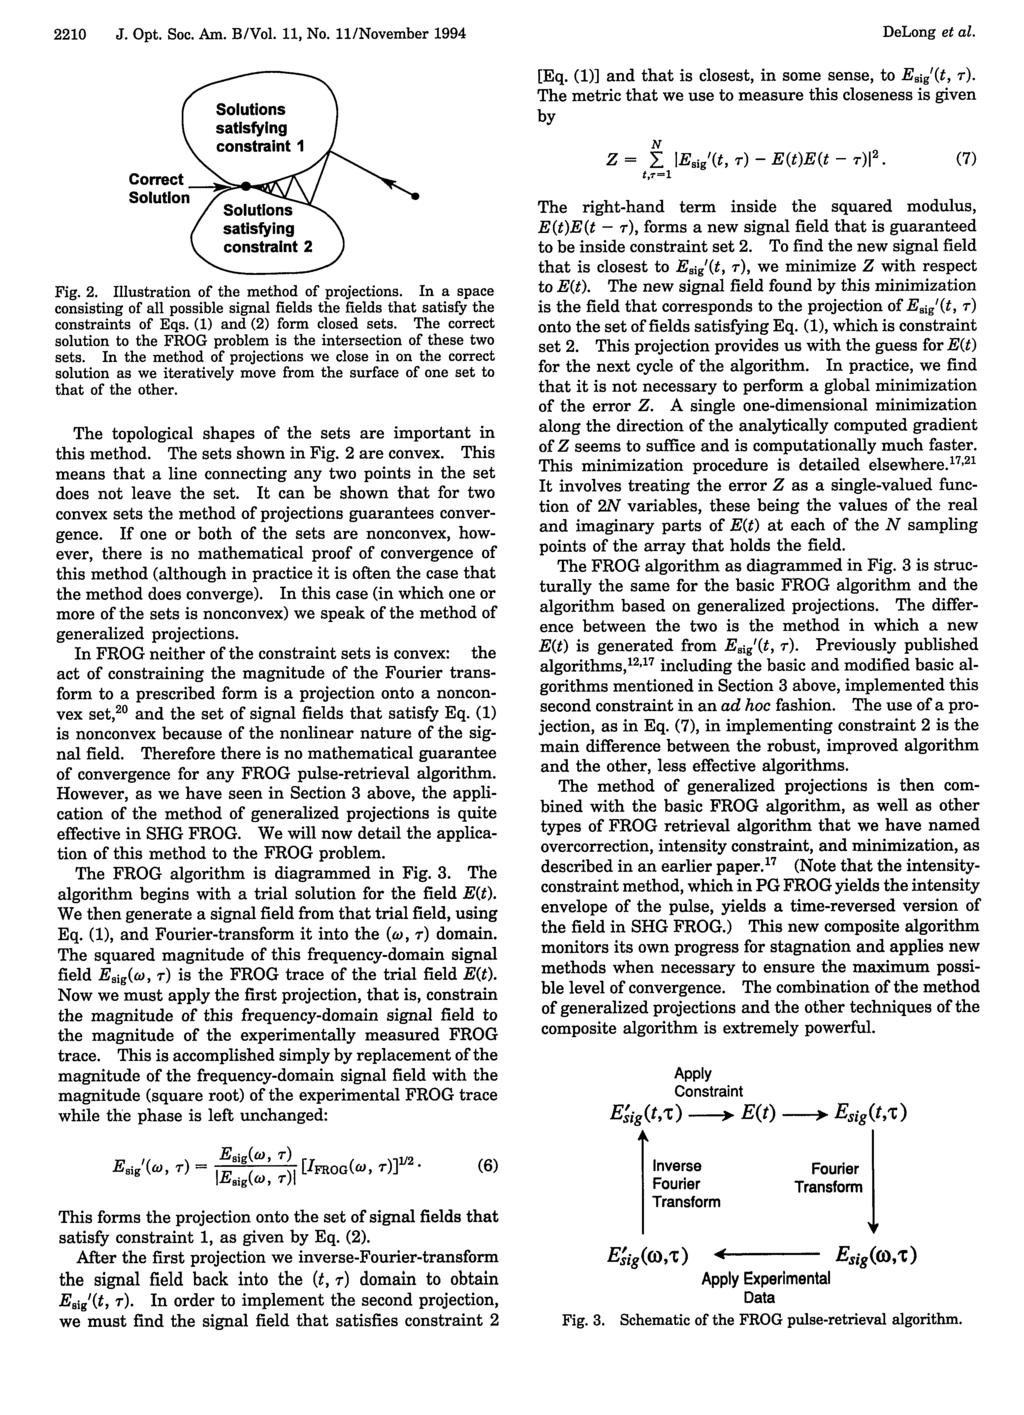 2210 J. Opt. Soc. Am. B/Vol. 11, No. 11/November 1994 orrect Solution SolutionsA satisfying constraint 2 Fig. 2. Illustration of the method of projections.